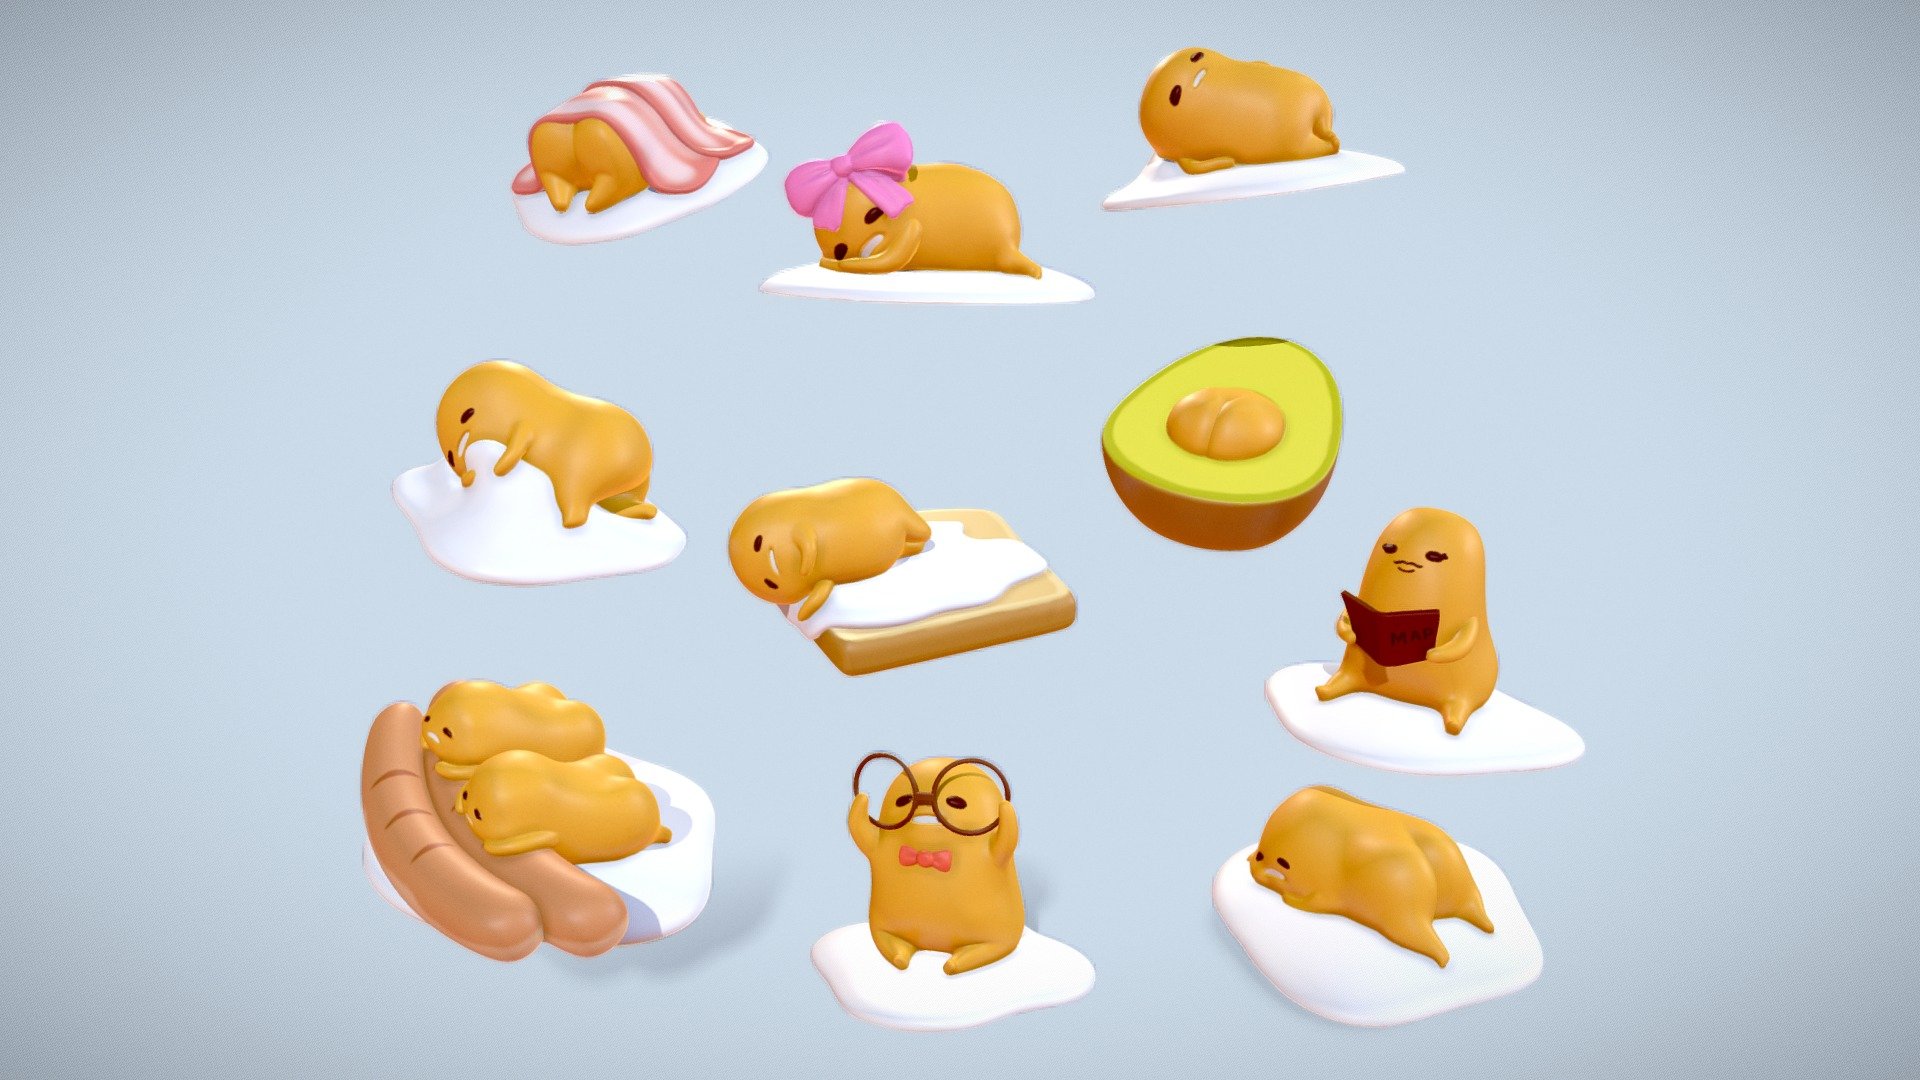 Made live on twitch:
https://www.twitch.tv/lizzurd

You can downoad the miniatures at:
https://artstn.co/m/gxd8 - Gudetama printable miniatures - 3D model by minibabylizard 3d model